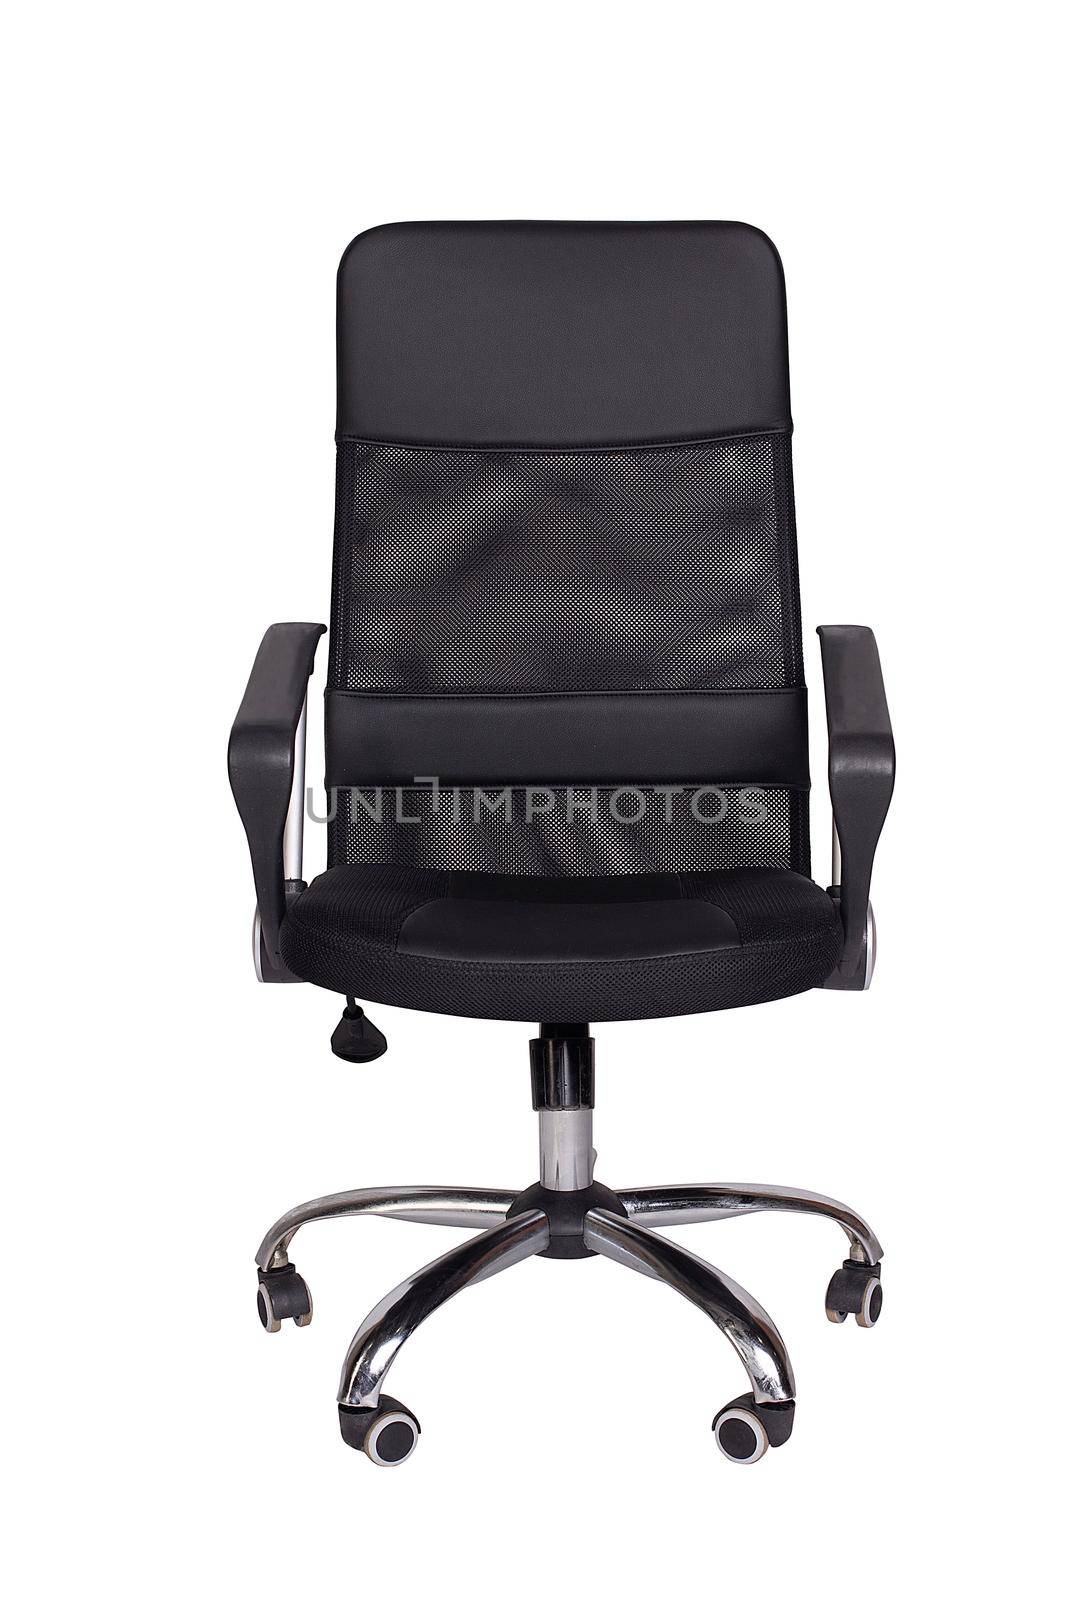 Black office armchair isolated on white background. Front view